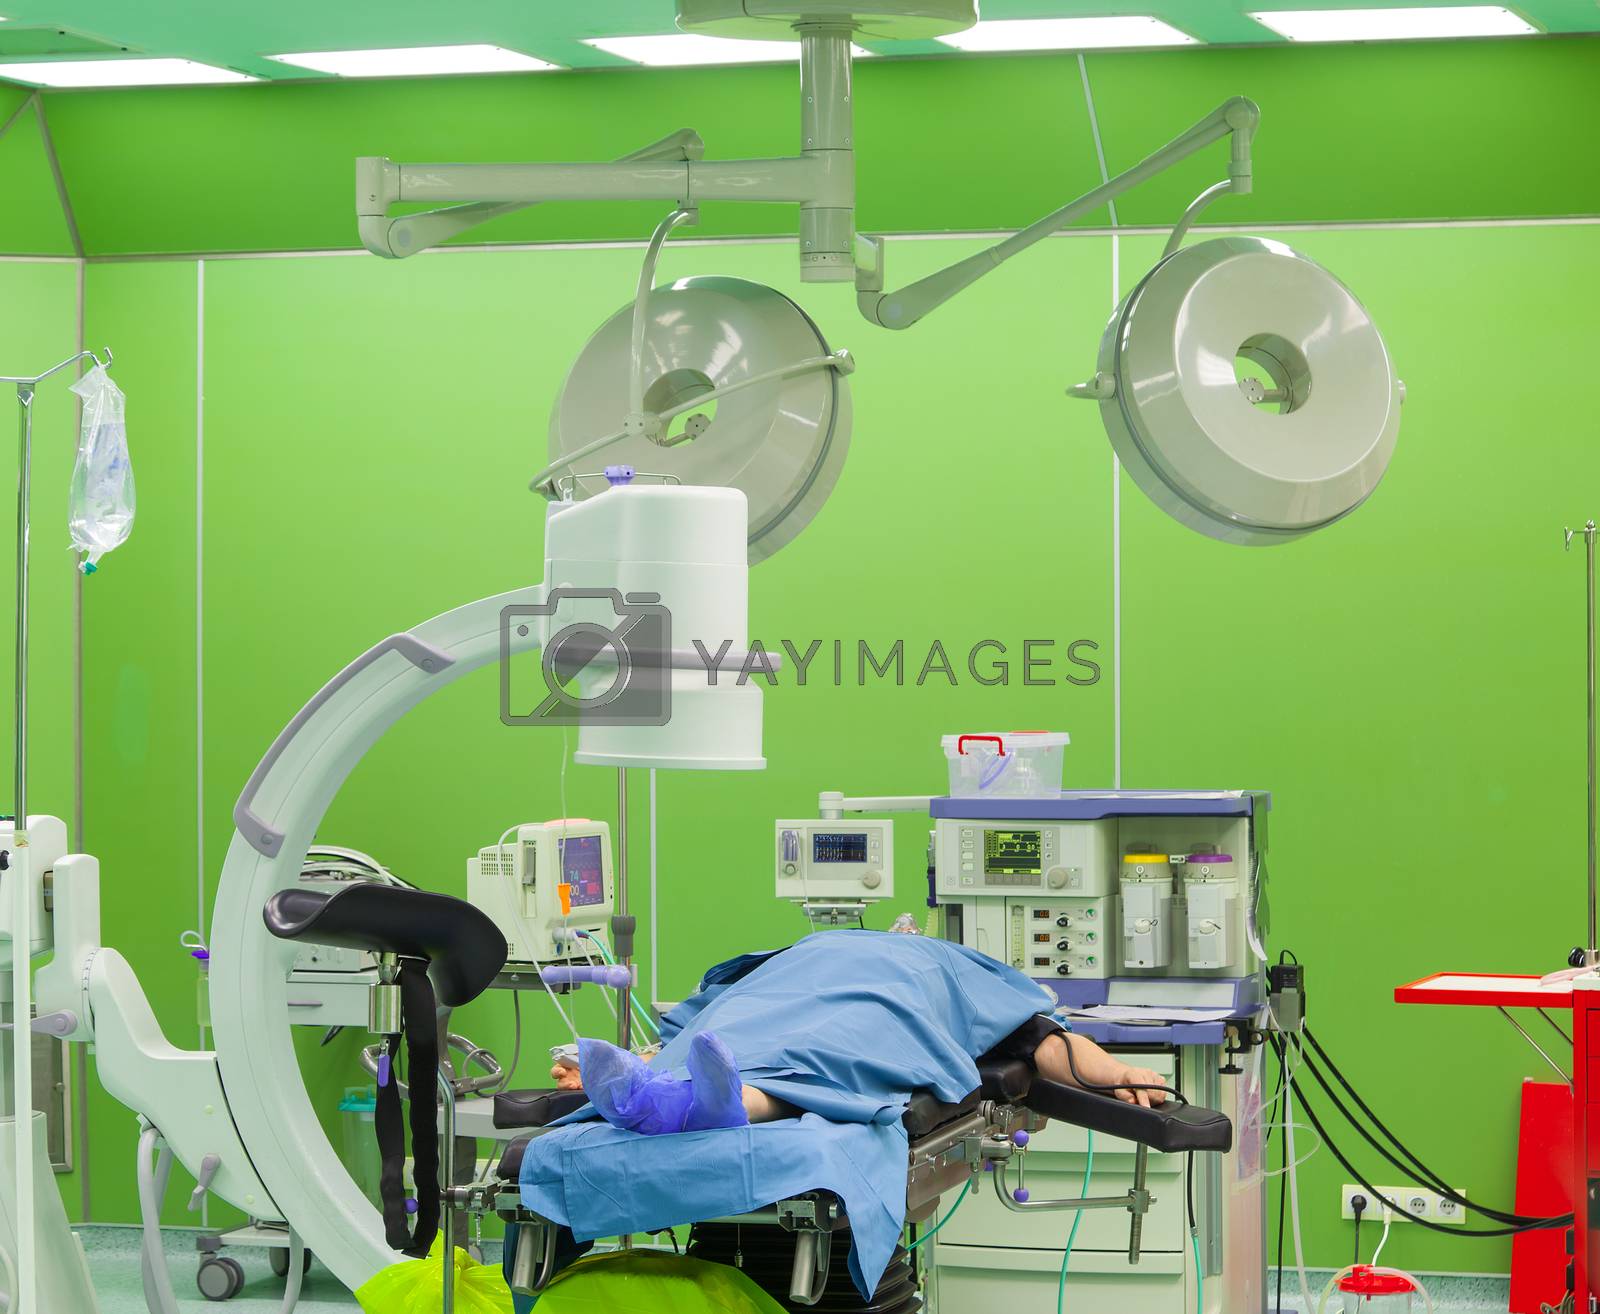 Royalty free image of Surgery Hospital Patient by vilevi